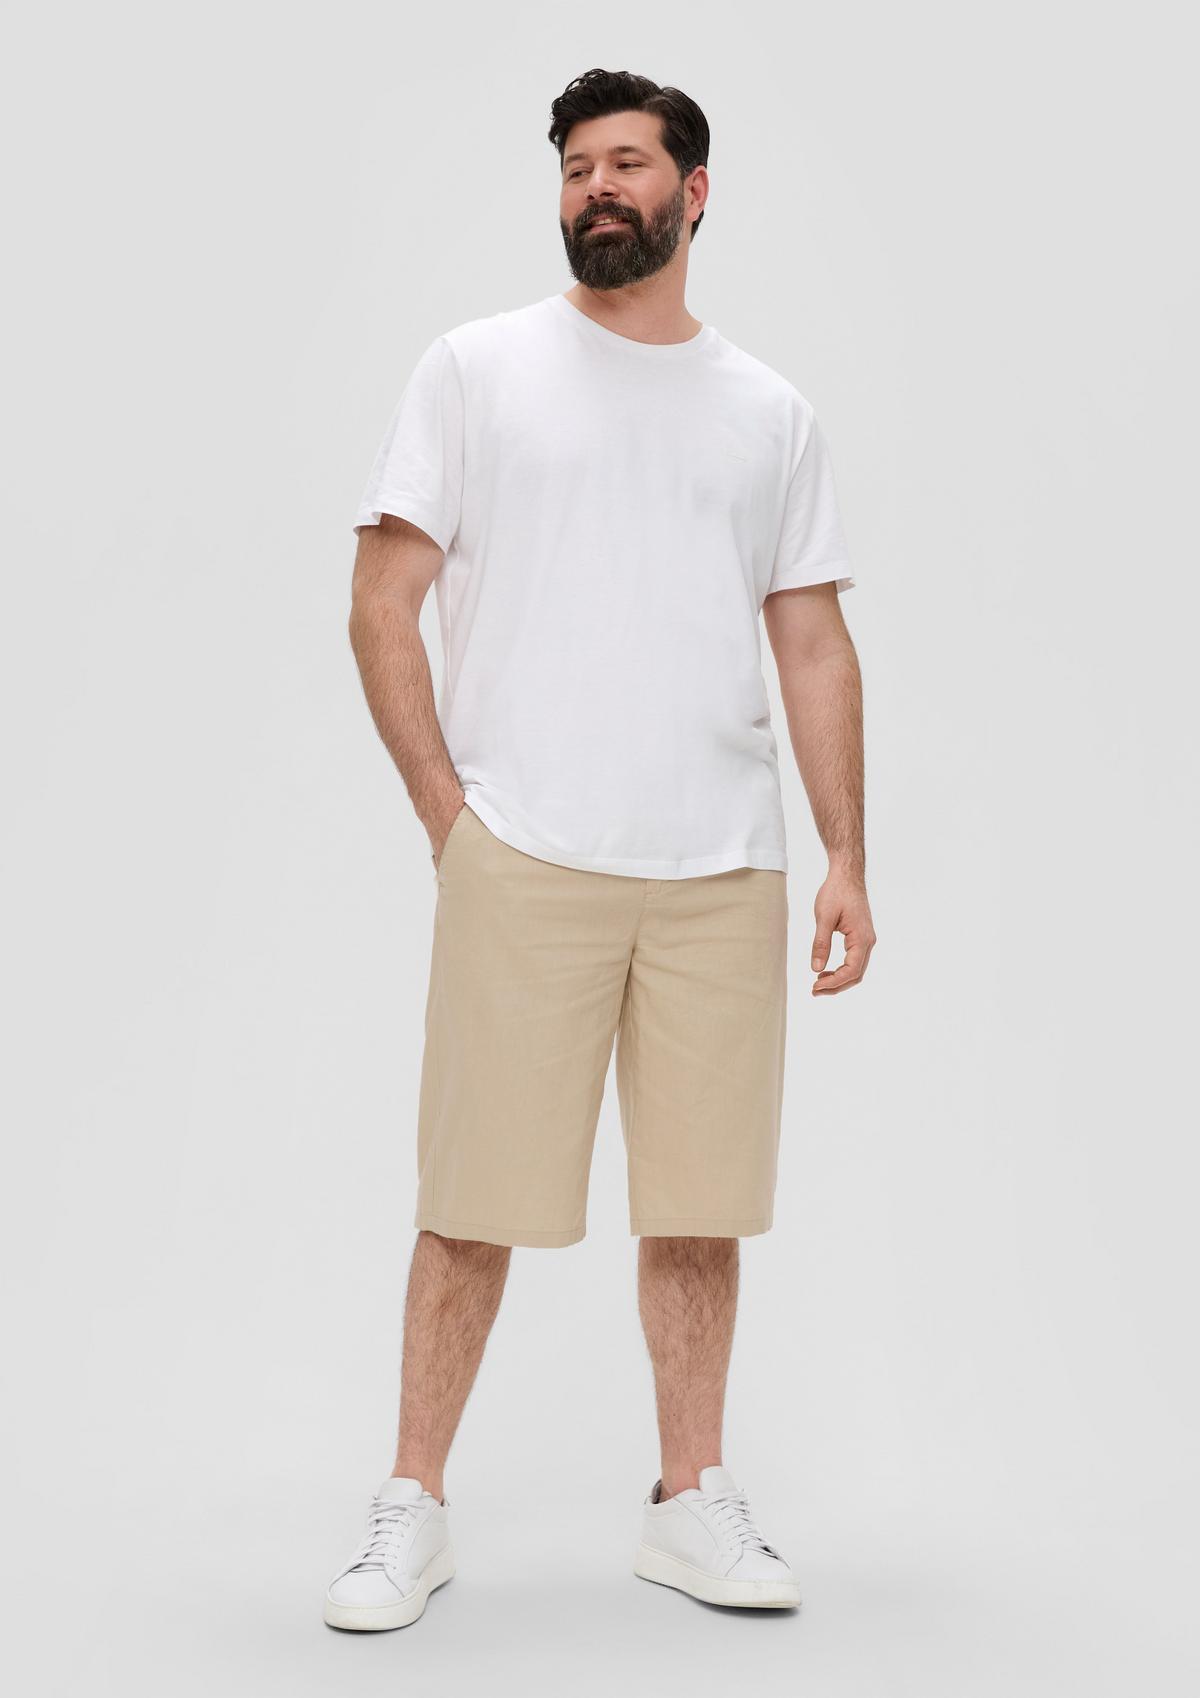 Relaxed fit: Bermuda shorts in blended linen